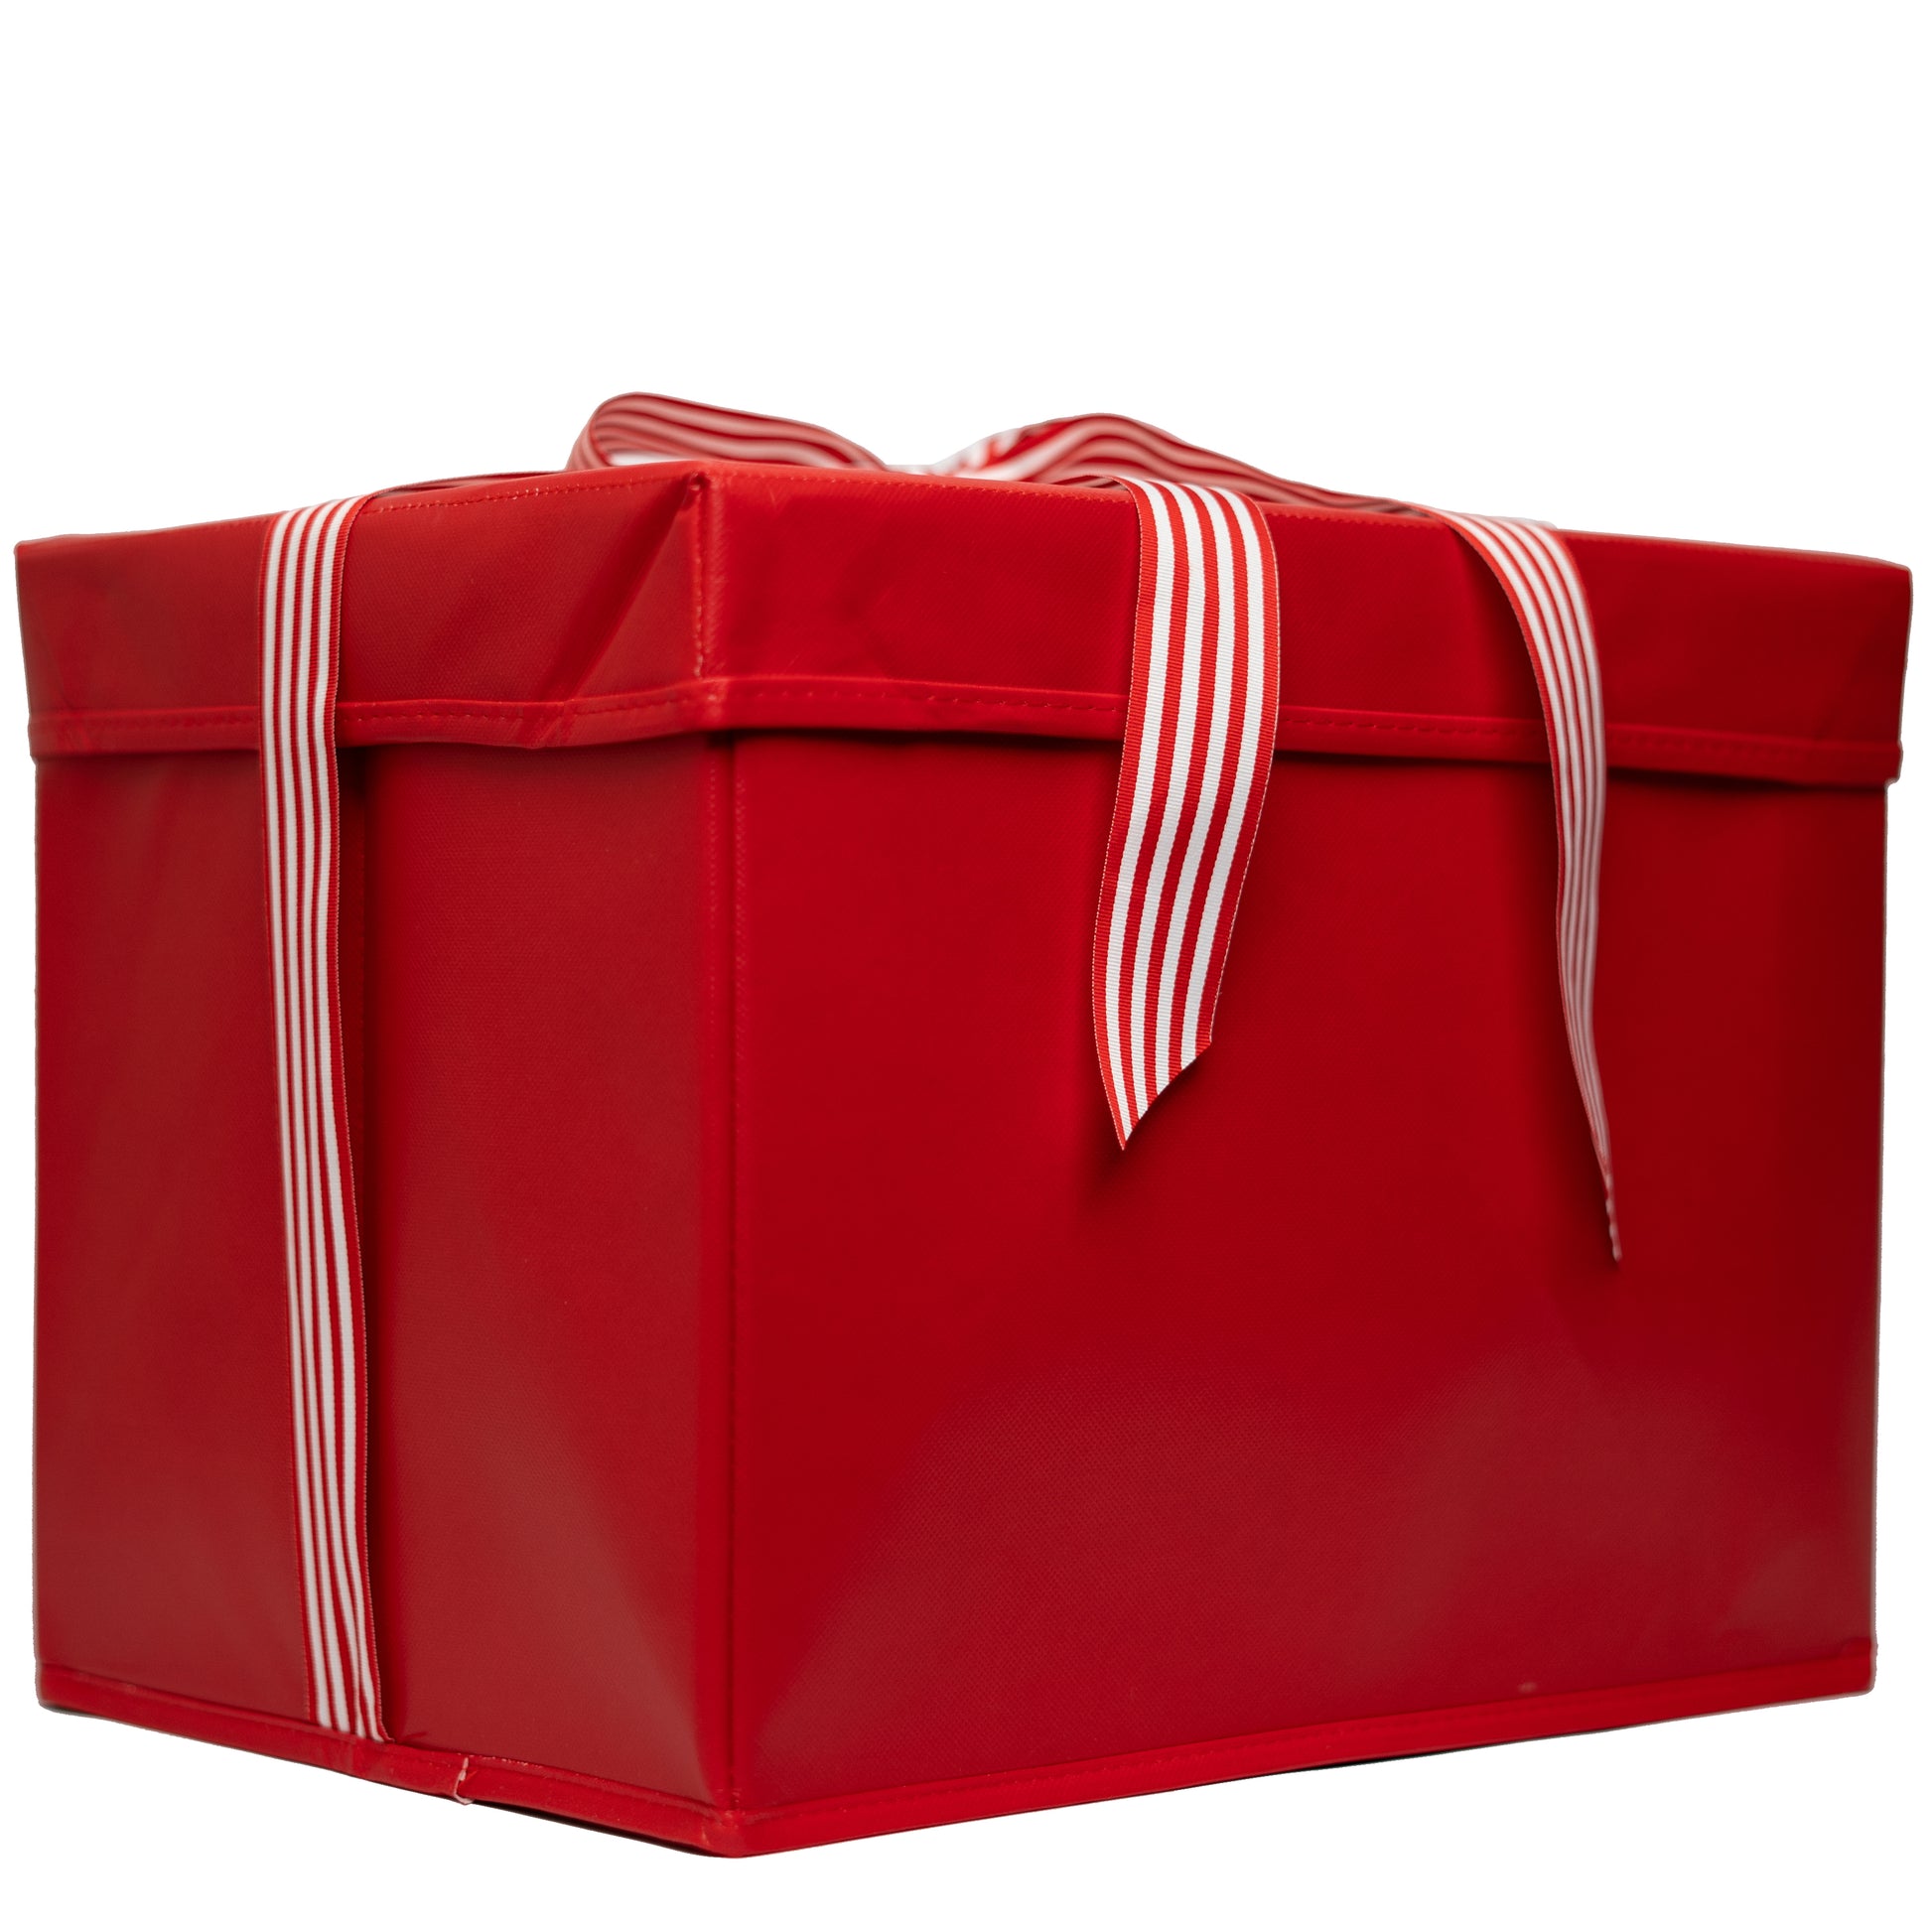 Large Red Heavy-Duty Extra Strong Collapsible Gift Box with ribbon